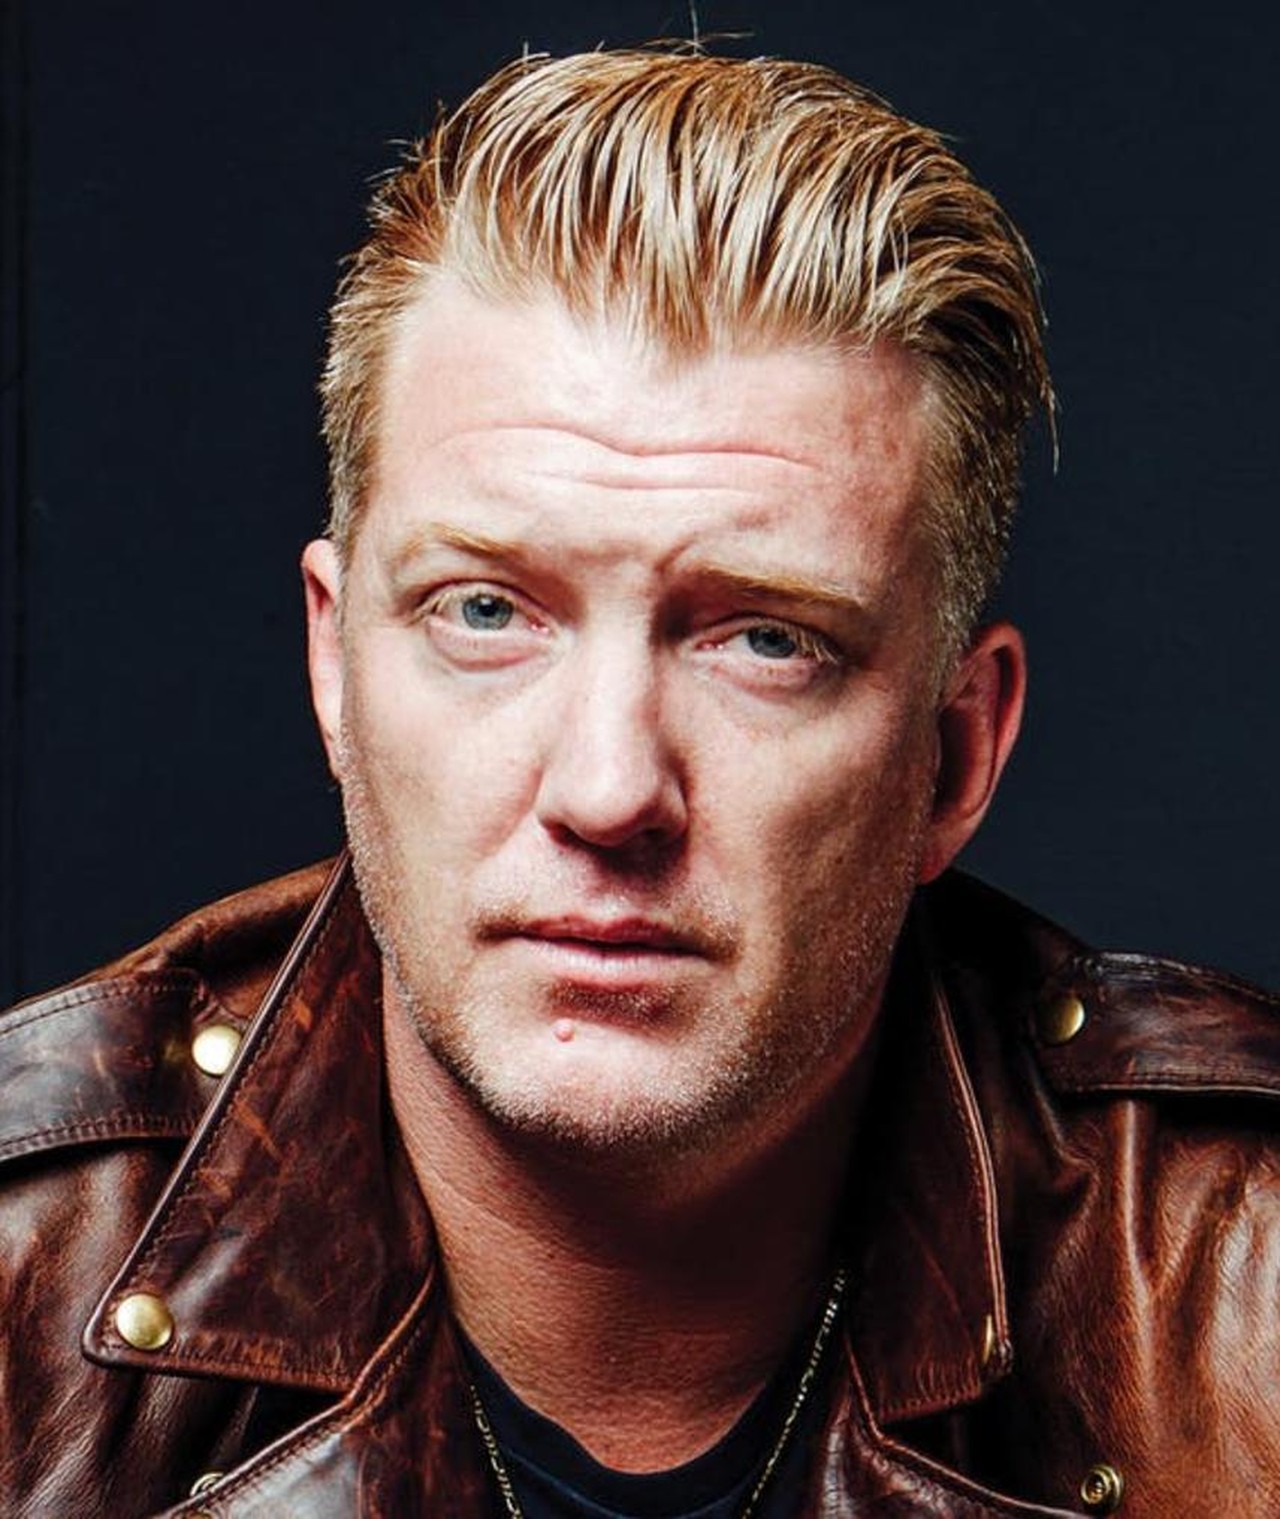 josh homme dating the girl from the ring